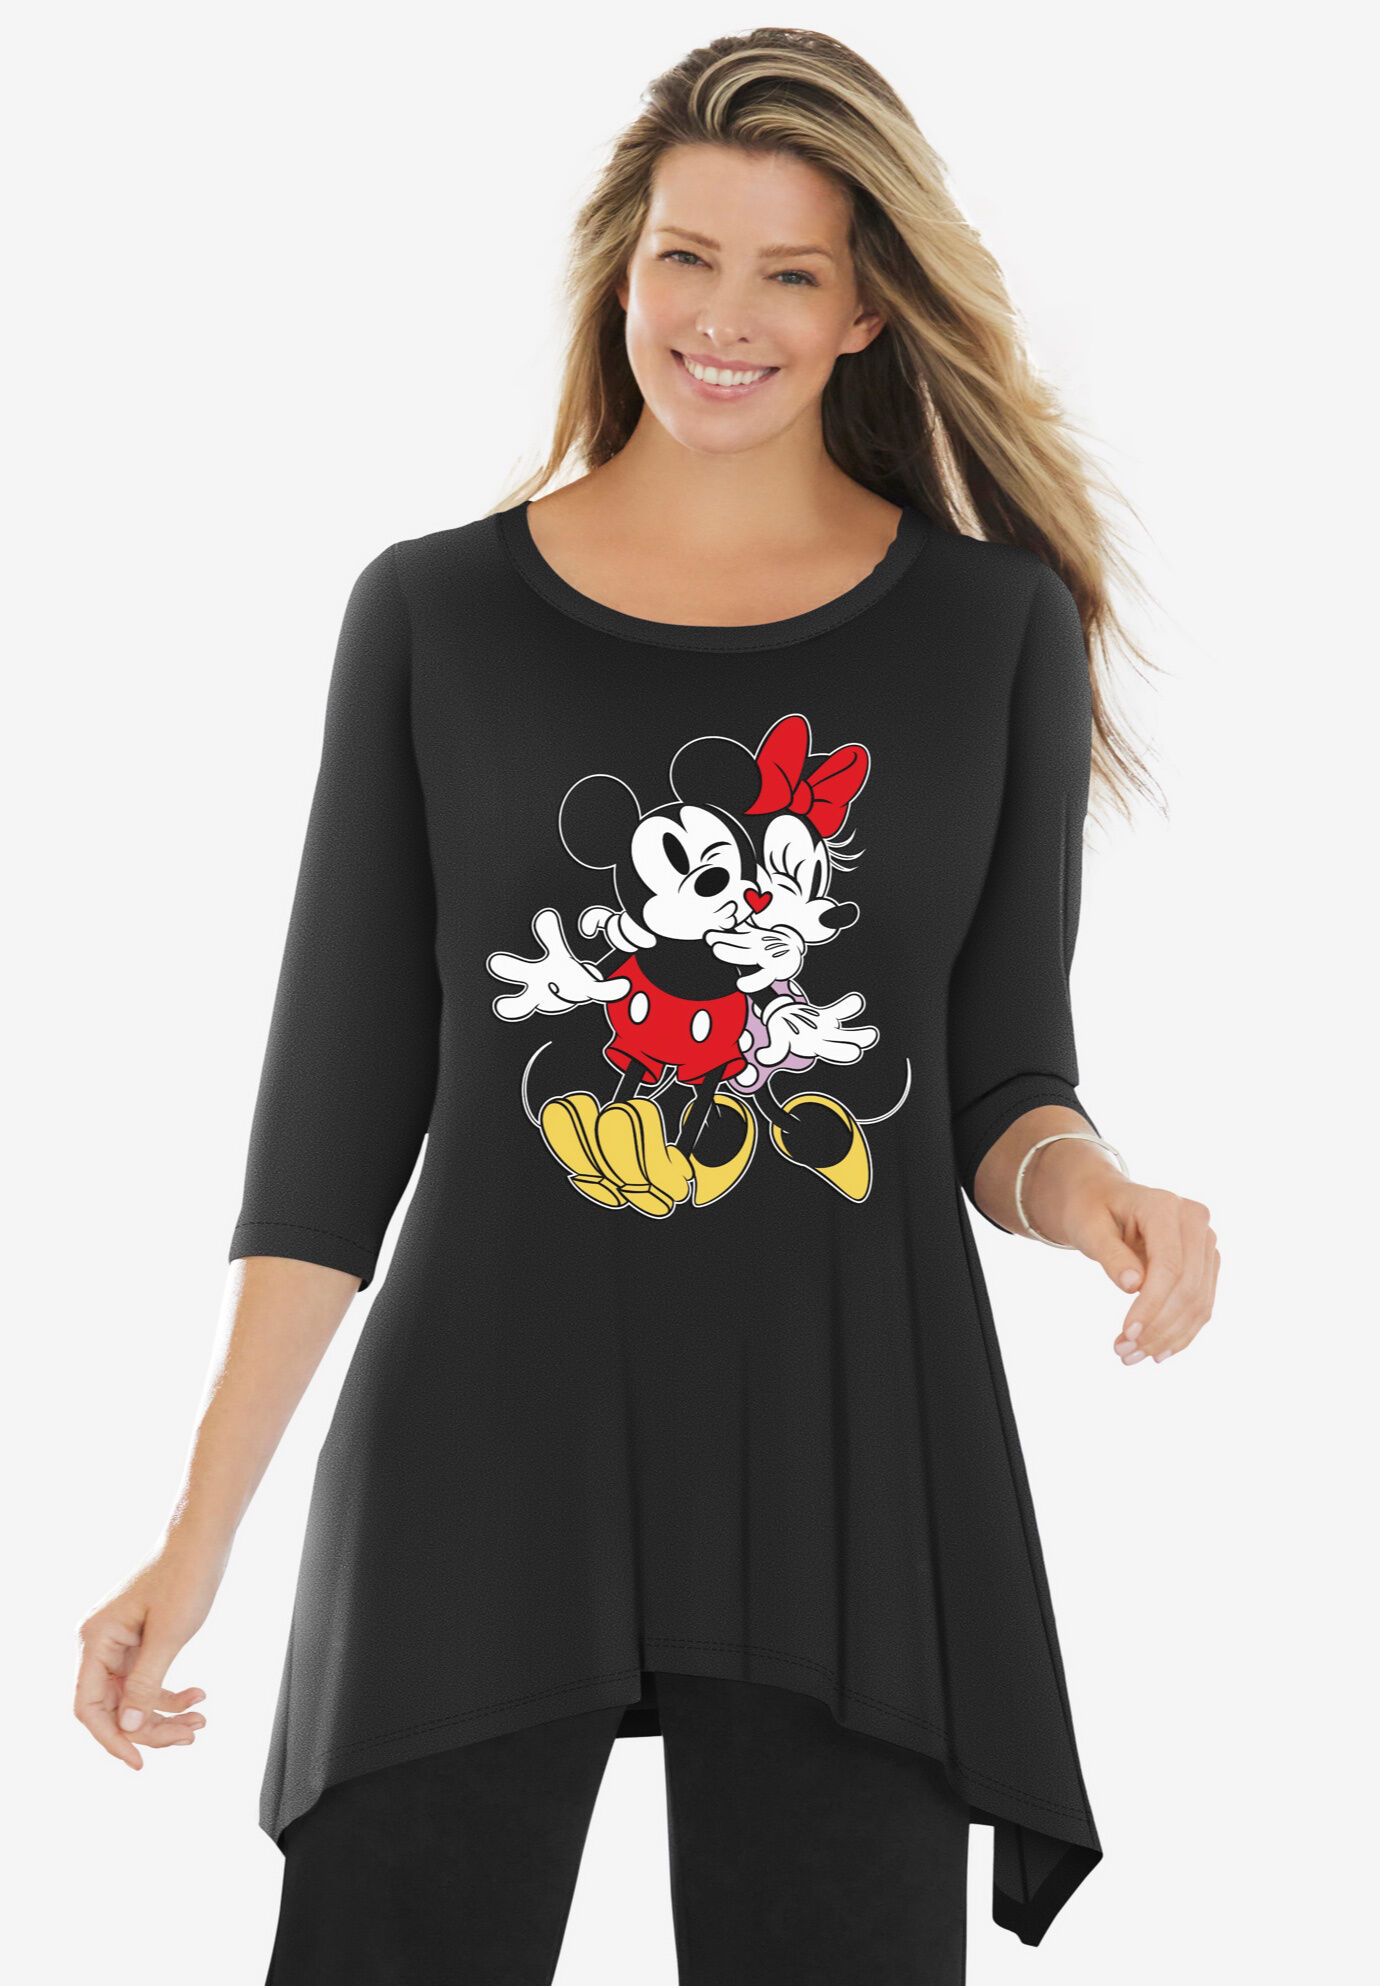 Disney Women's Hanky Hem Black Tunic Mickey Mouse and Minnie Mouse